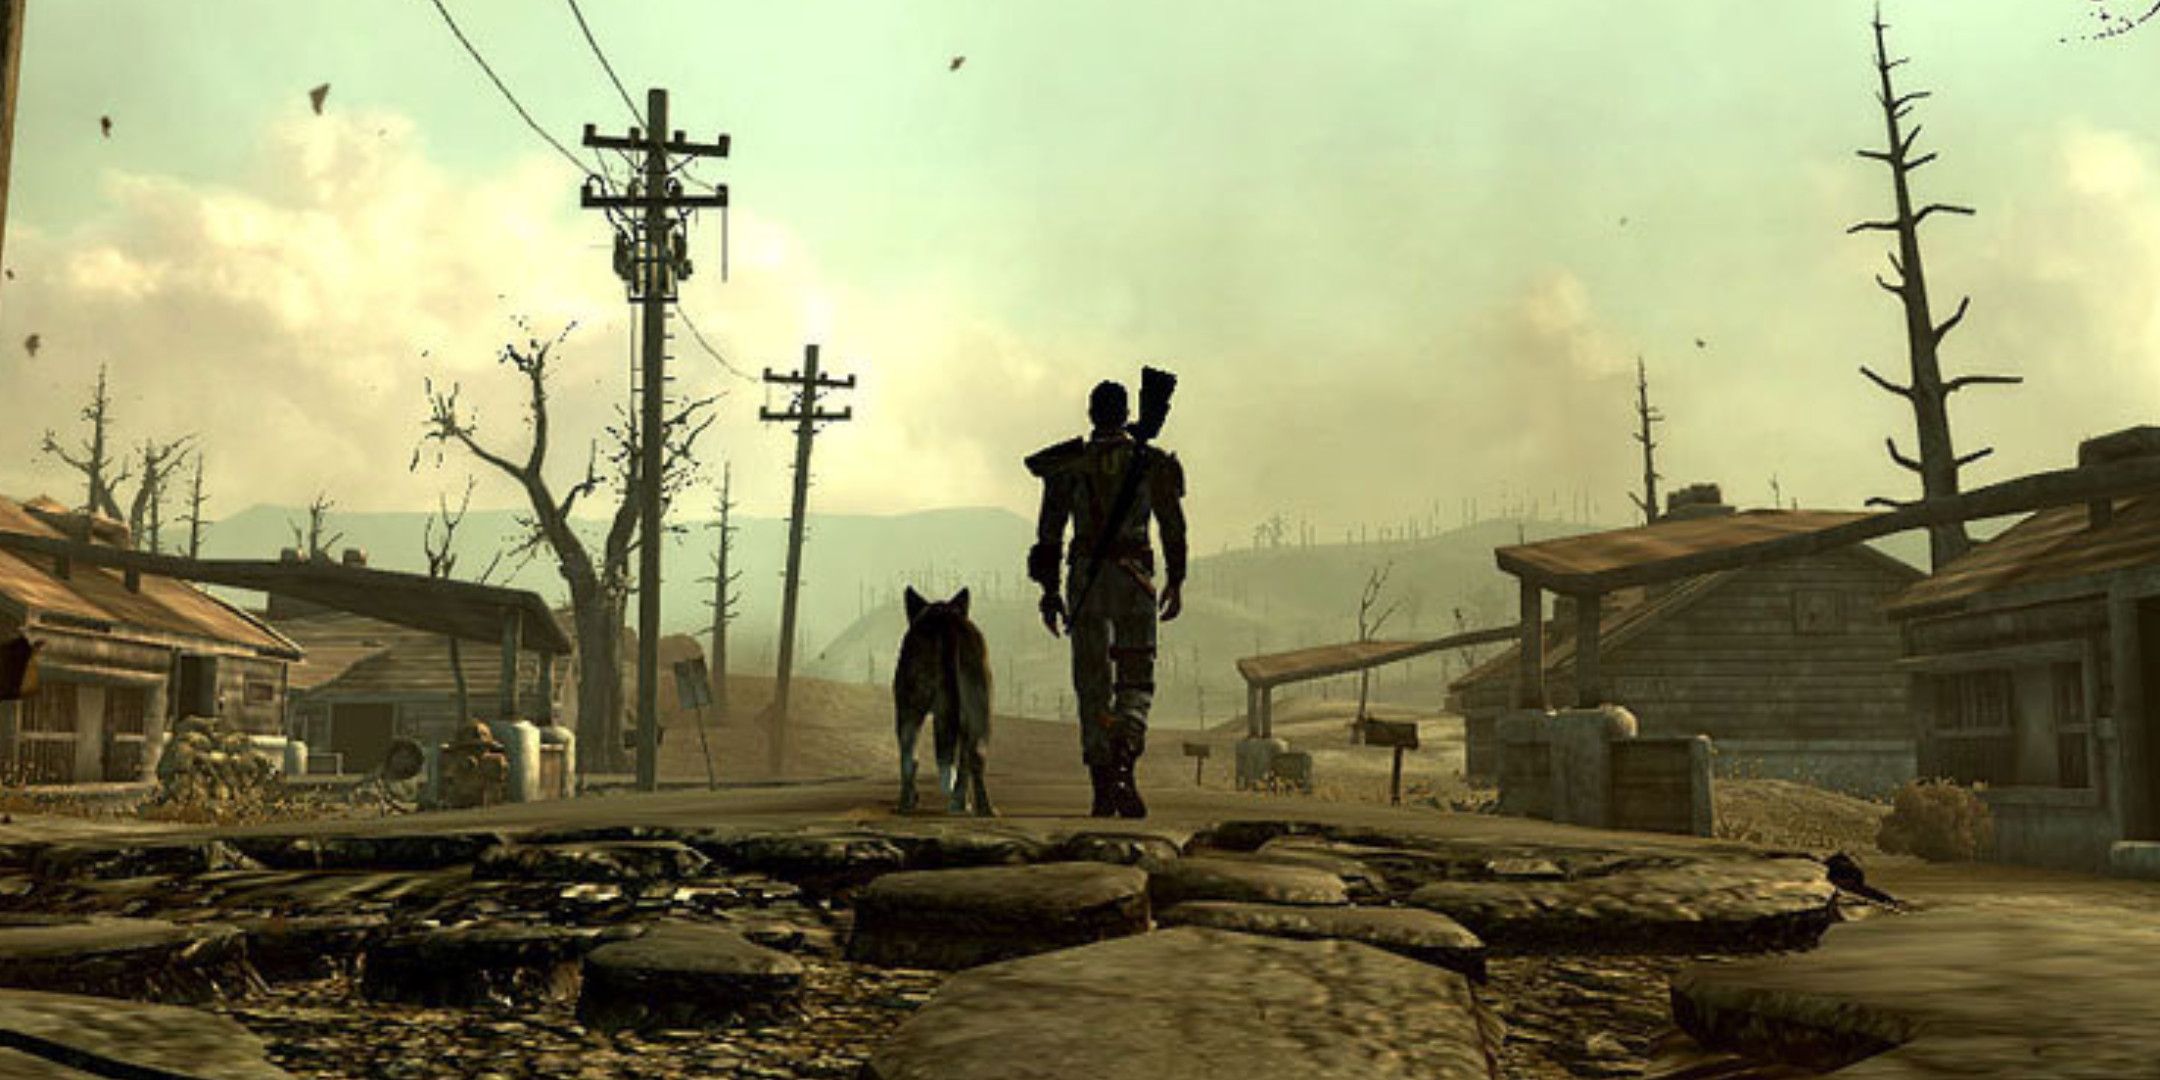 Fallout 3 protagonist and Dogmeat on a broekn road in the middle of some houses